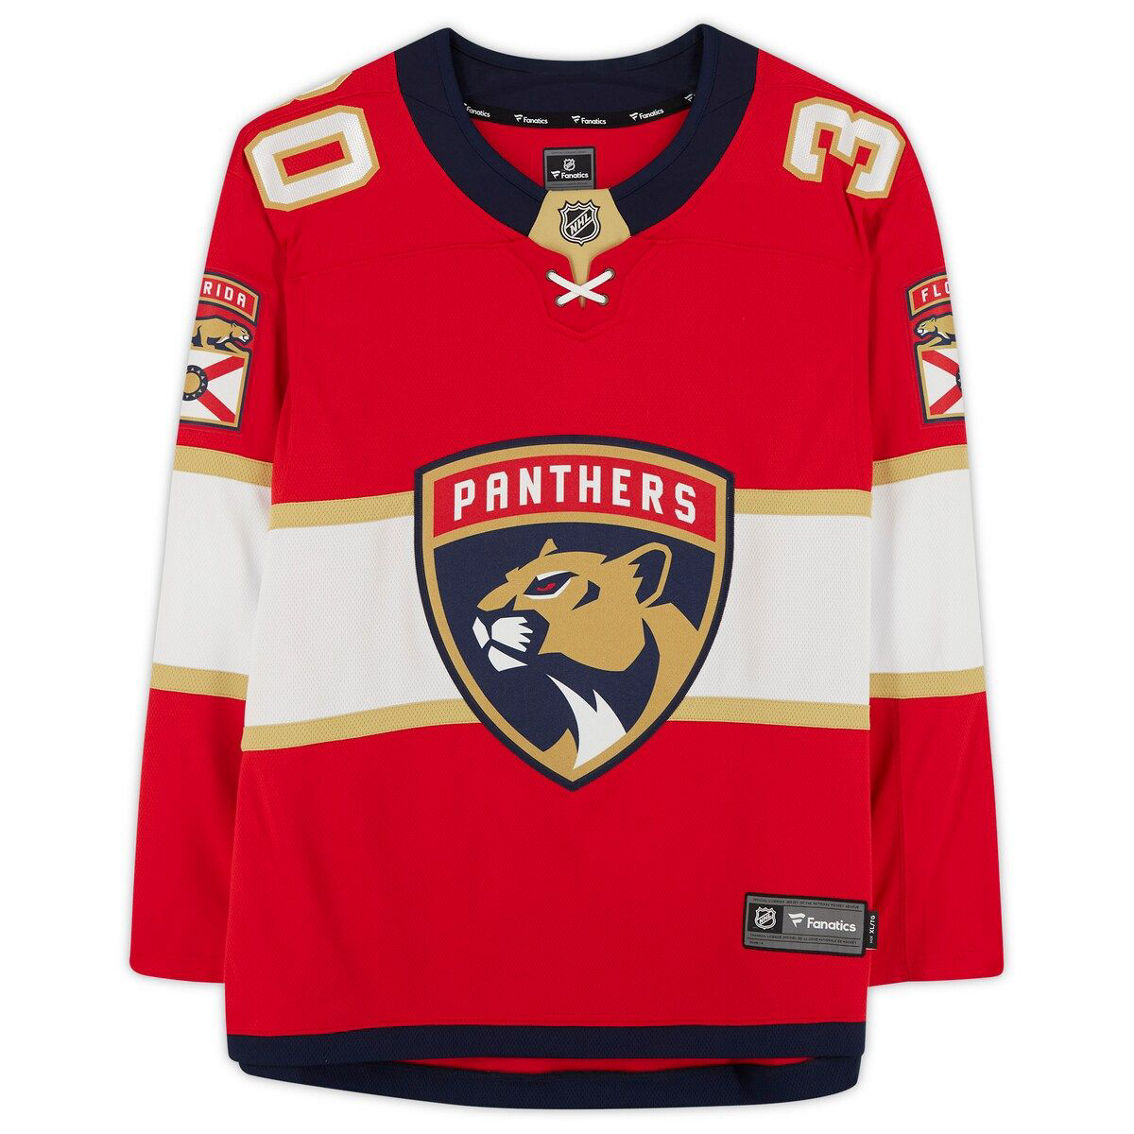 Fanatics Authentic Spencer Knight Red Florida Panthers Autographed Fanatics Breakaway Jersey - Image 4 of 4